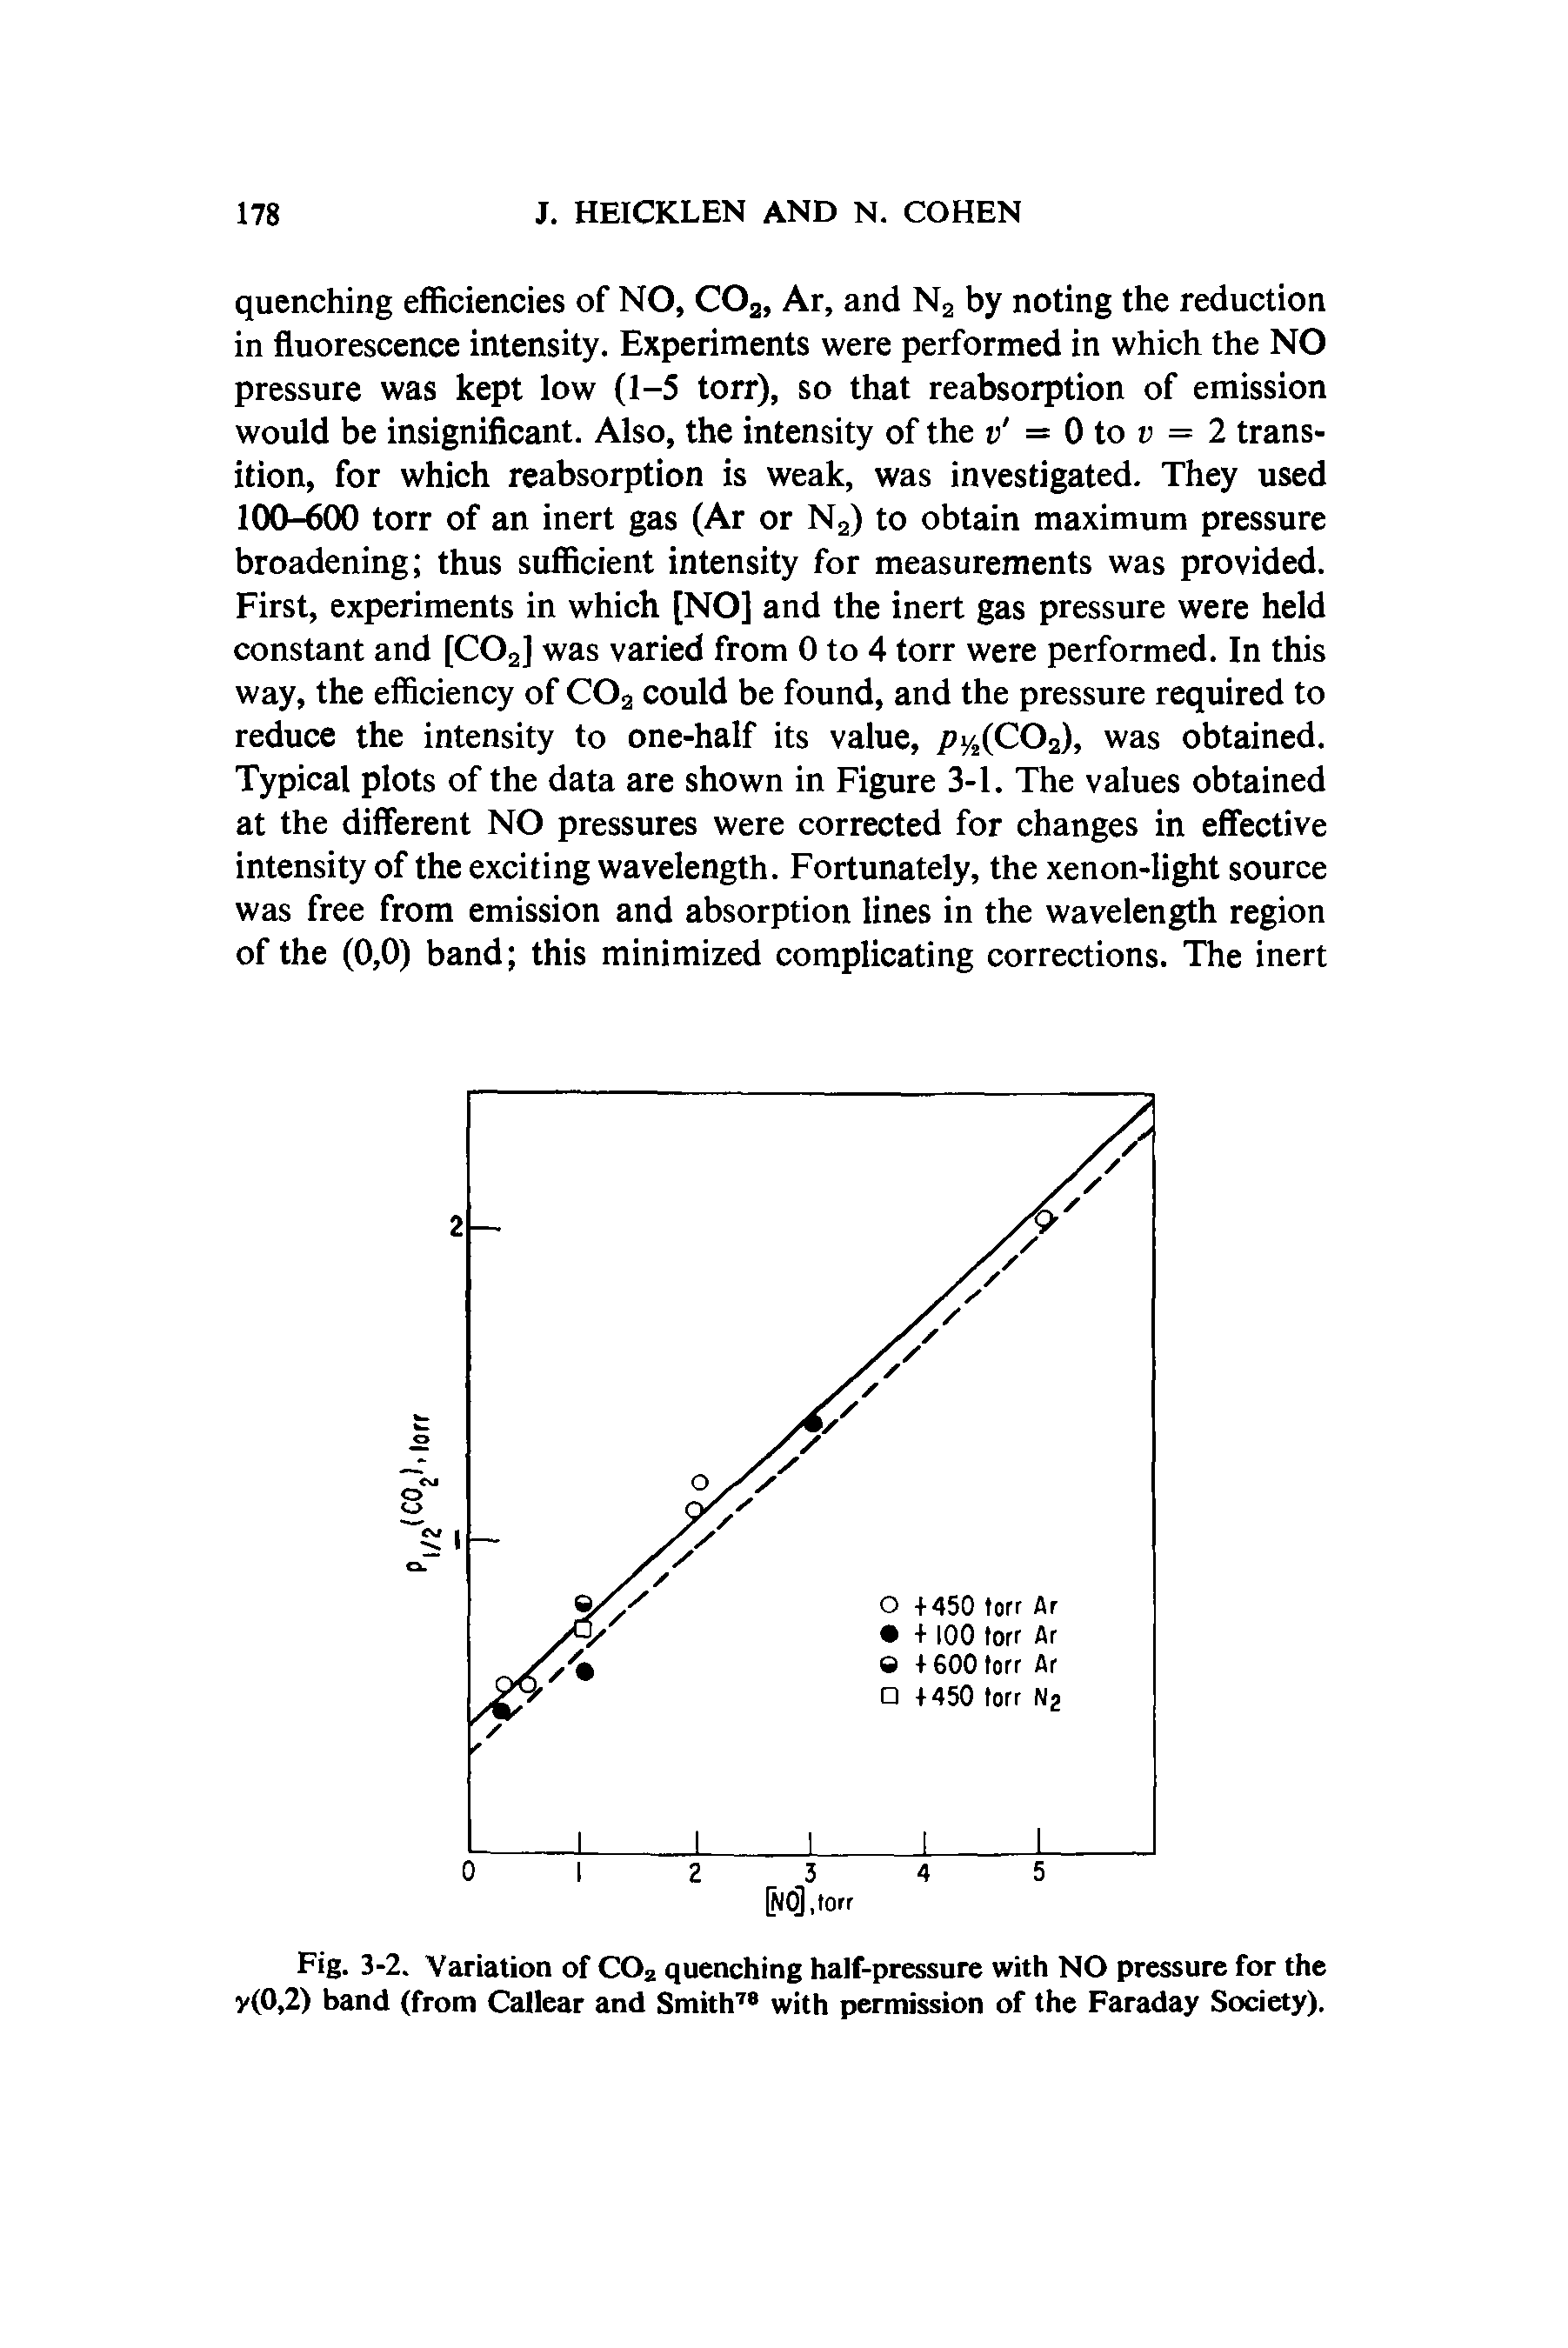 Fig. 3-2. Variation of COz quenching half-pressure with NO pressure for the y(0,2) band (from Callear and Smith78 with permission of the Faraday Society).